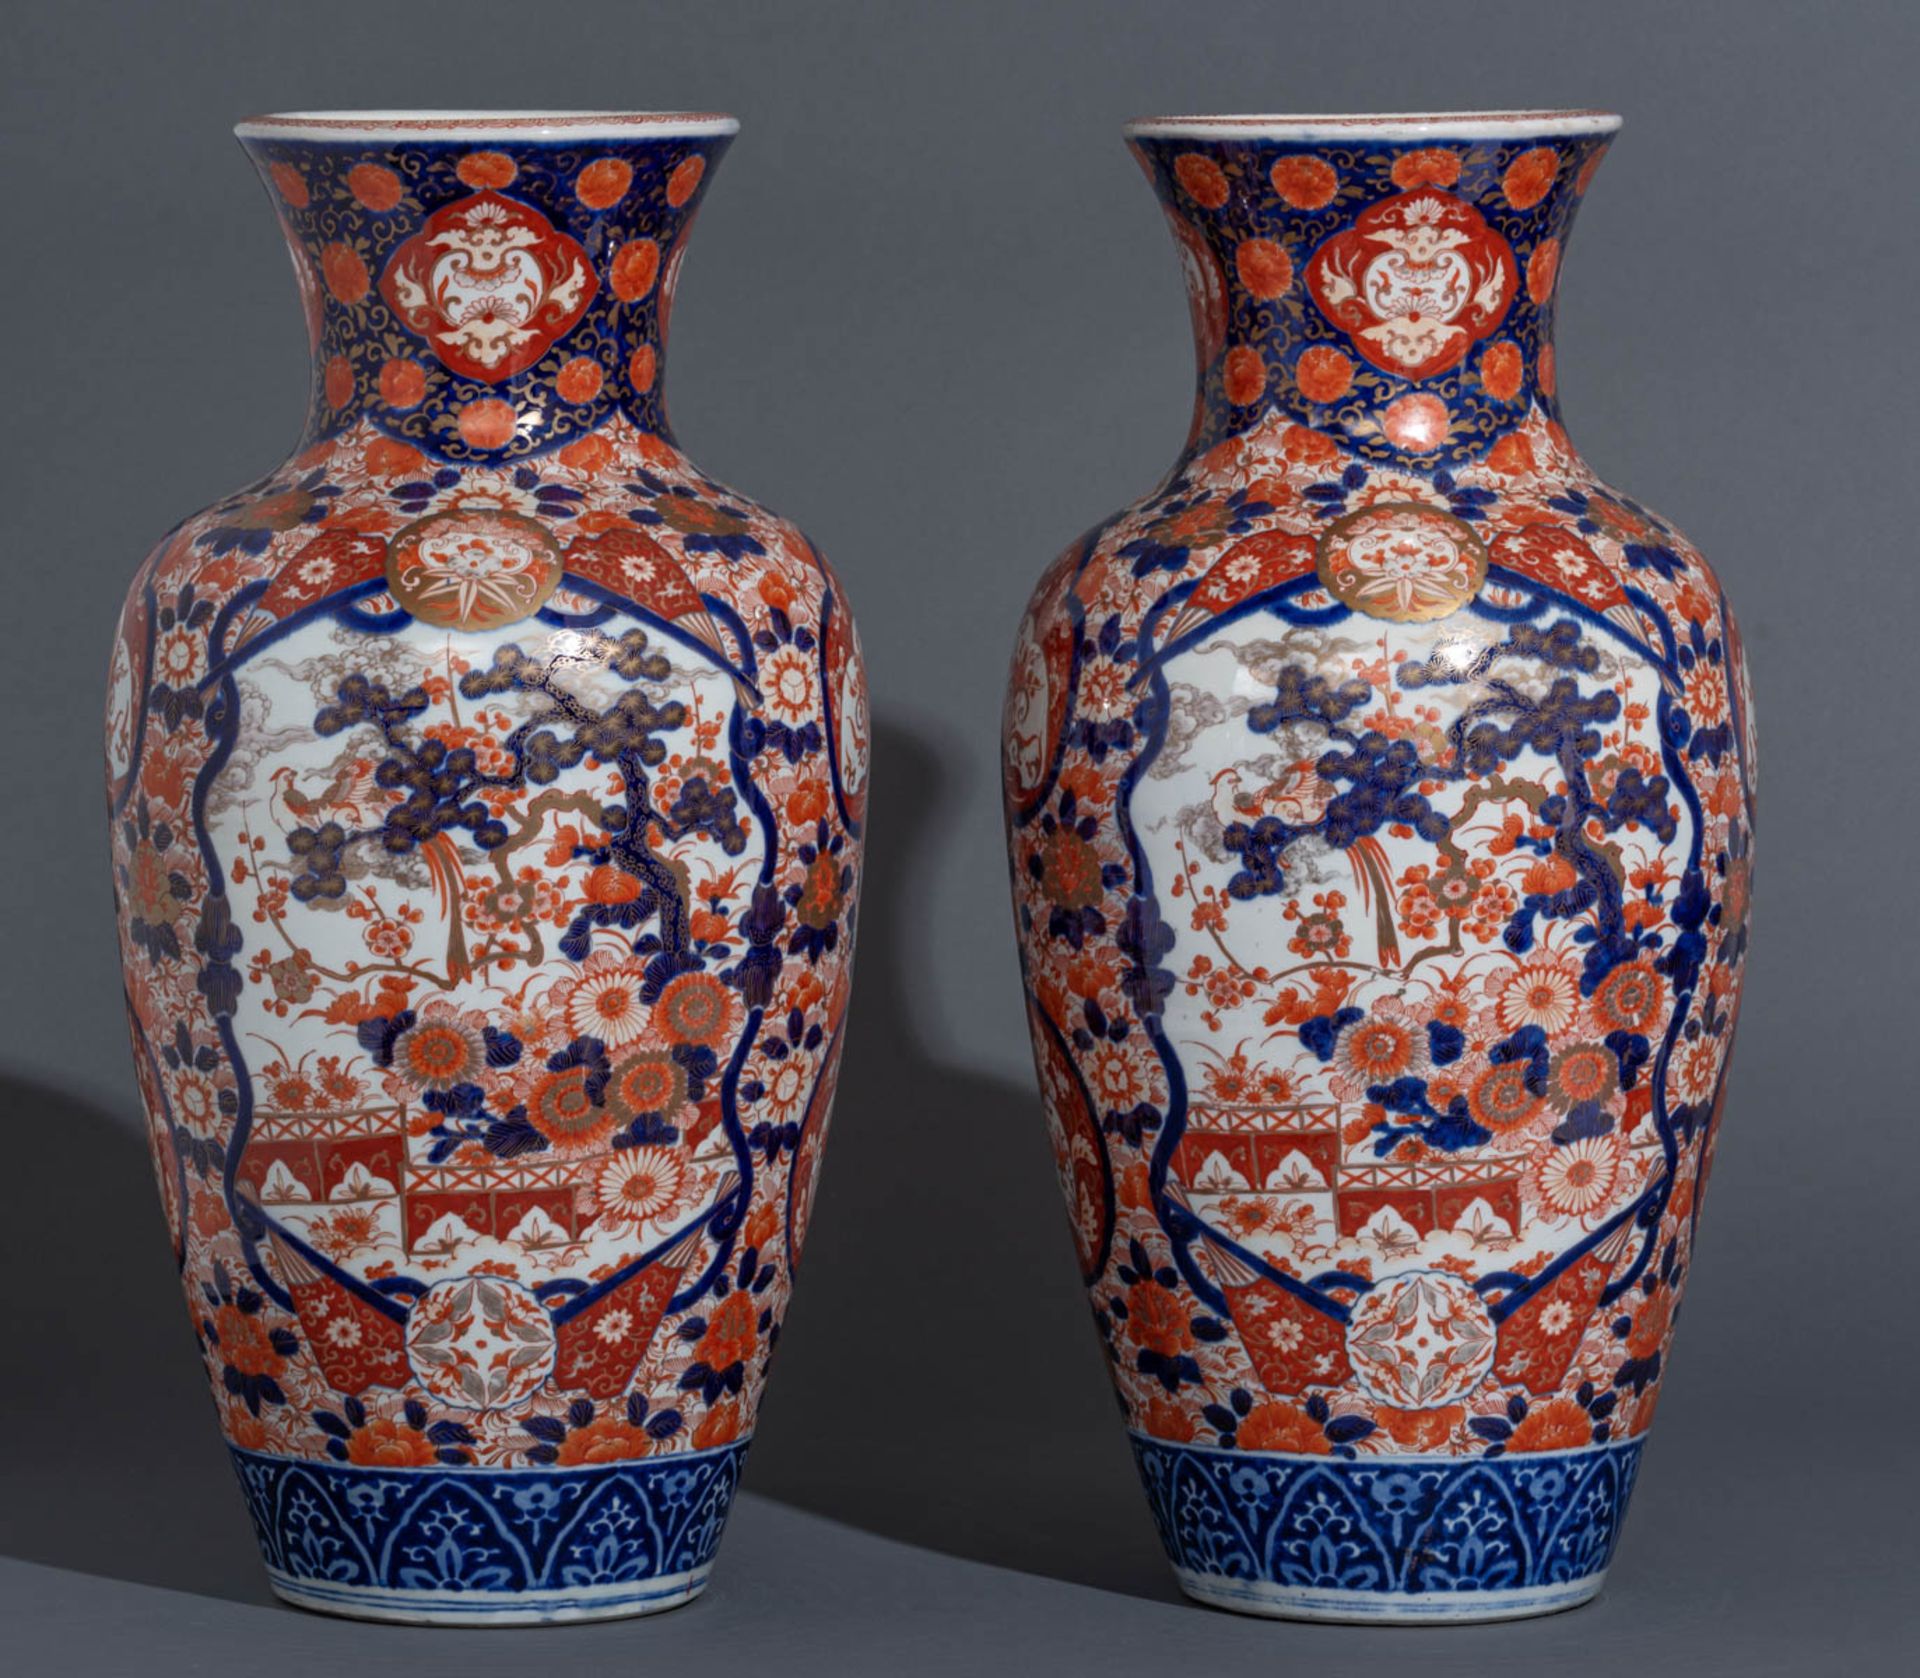 Two Japanese floral decorated Imari vases - Image 4 of 13